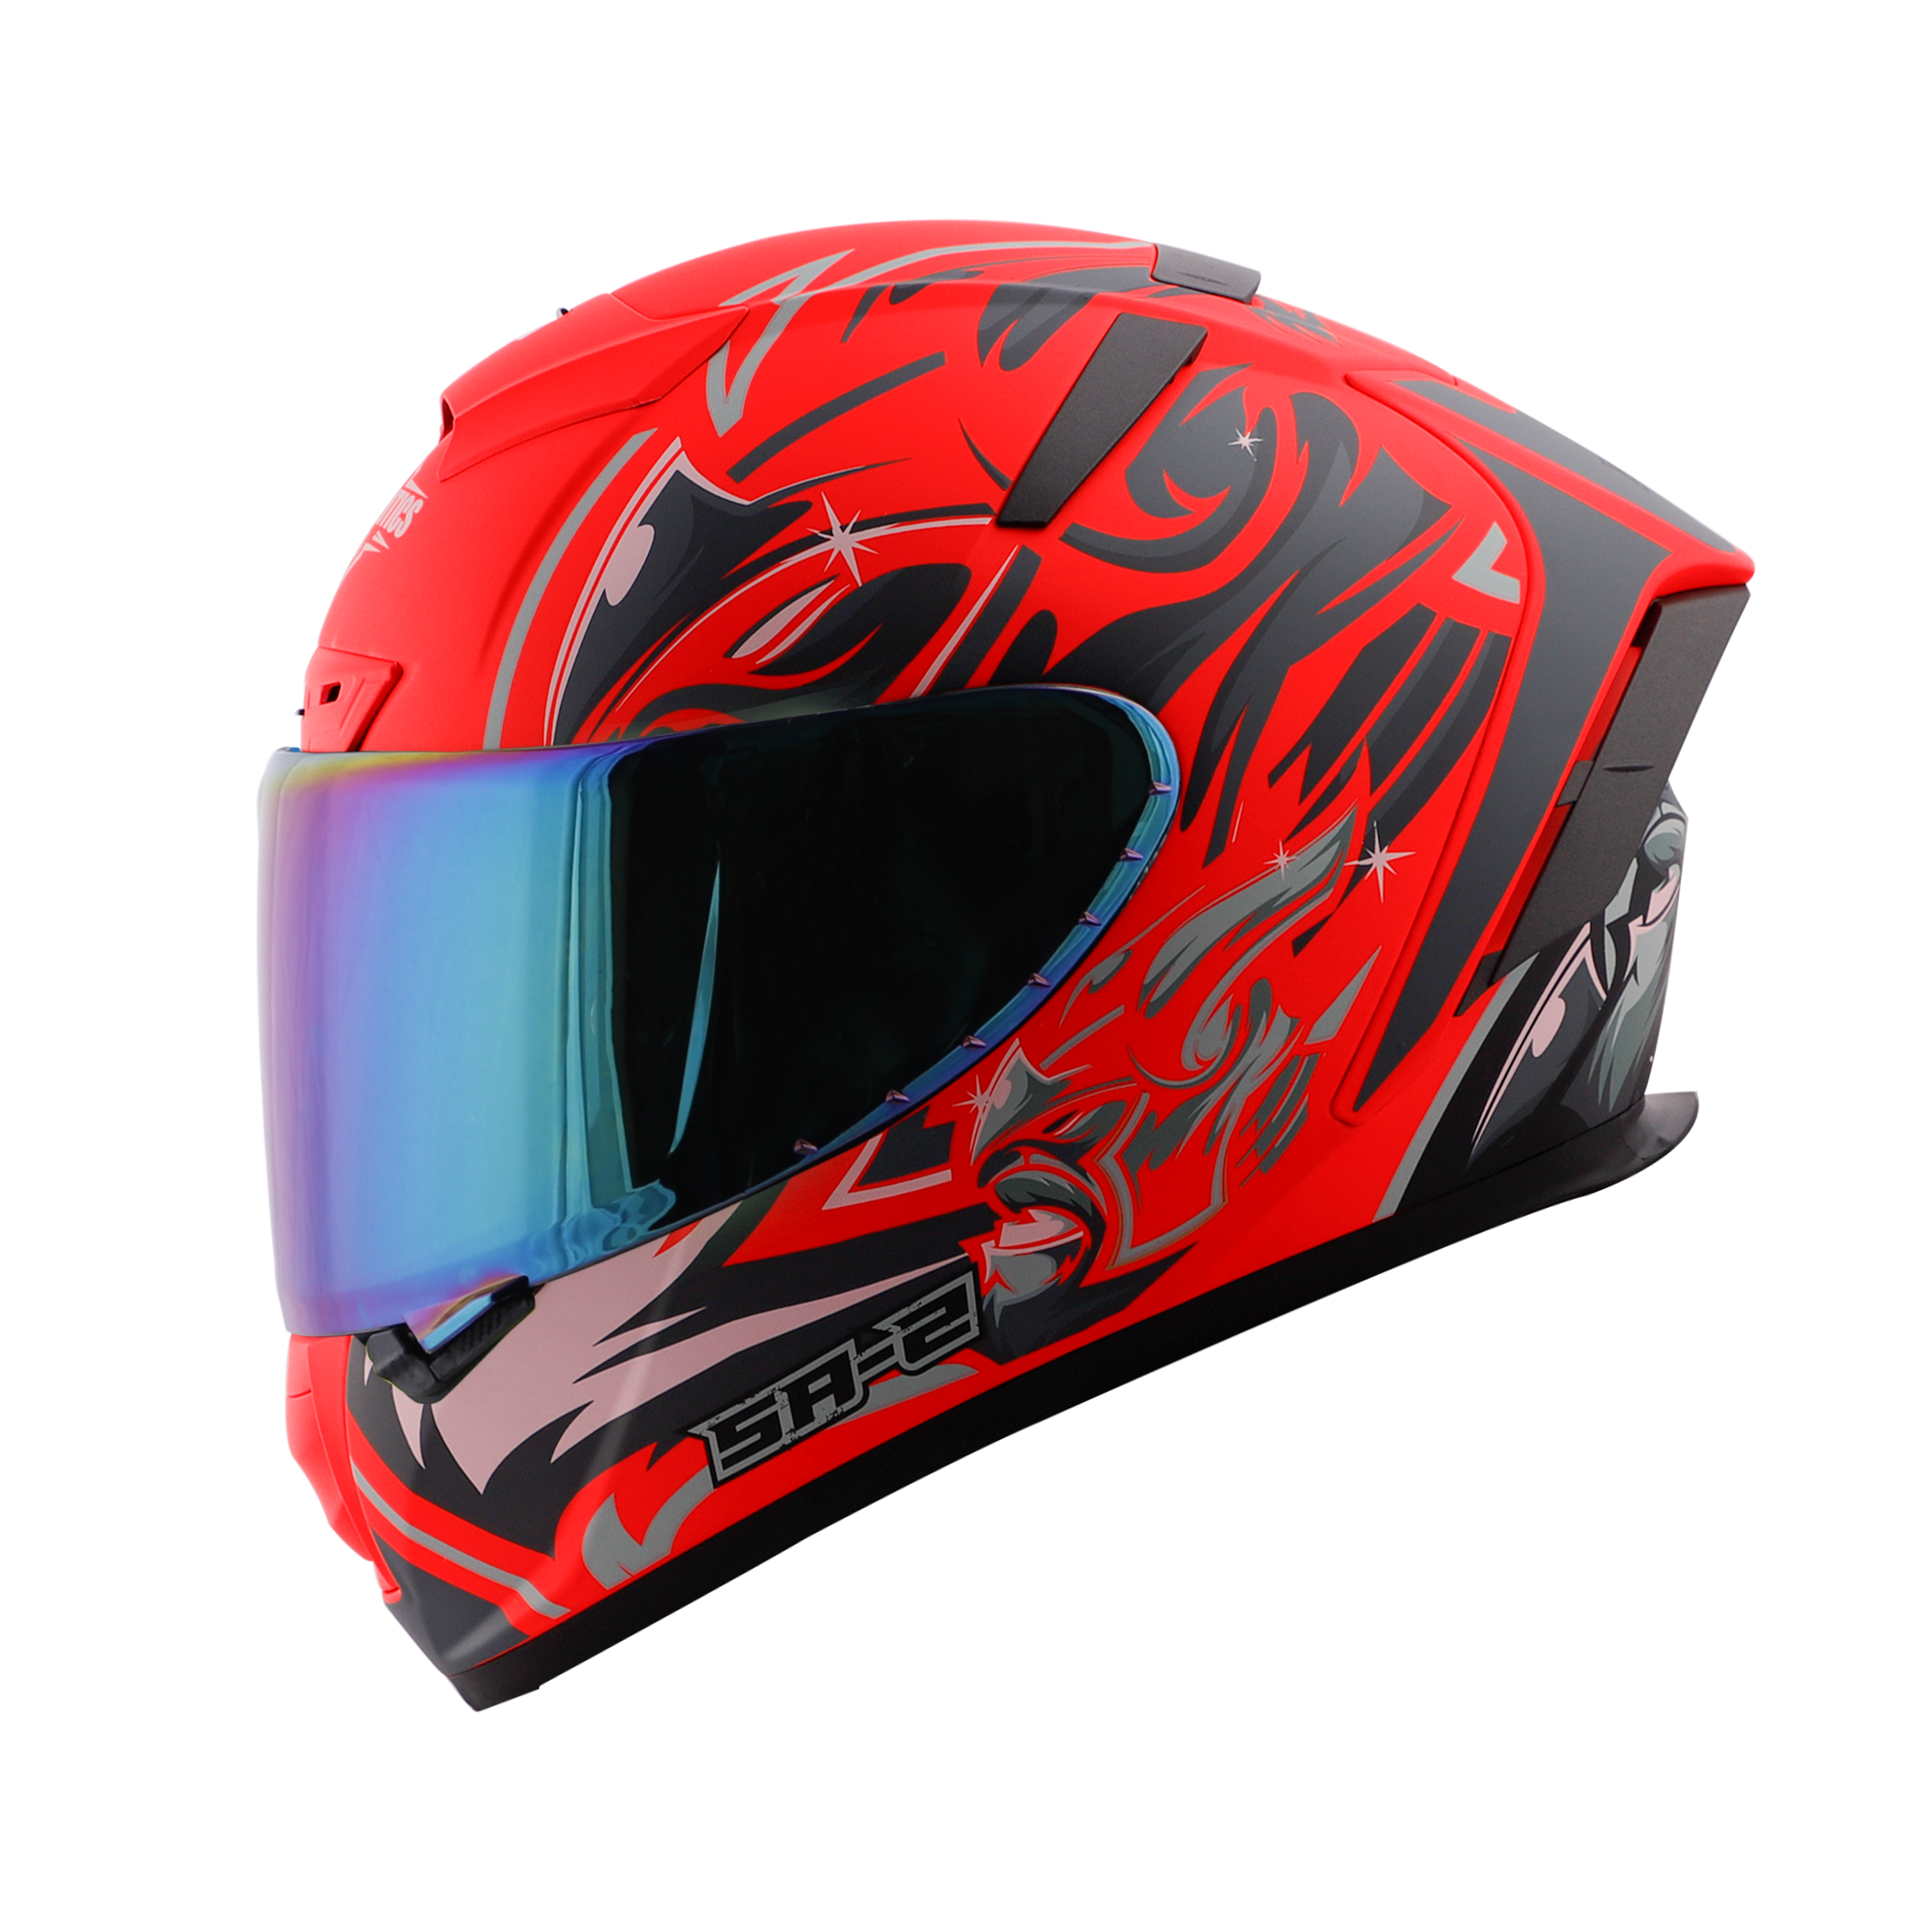 SA-2 VILLAIN GLOSSY FLUO WATERMELON WITH GREY (FITTED WITH CLEAR VISOR EXTRA RAINBOW CHROME VISOR FREE)